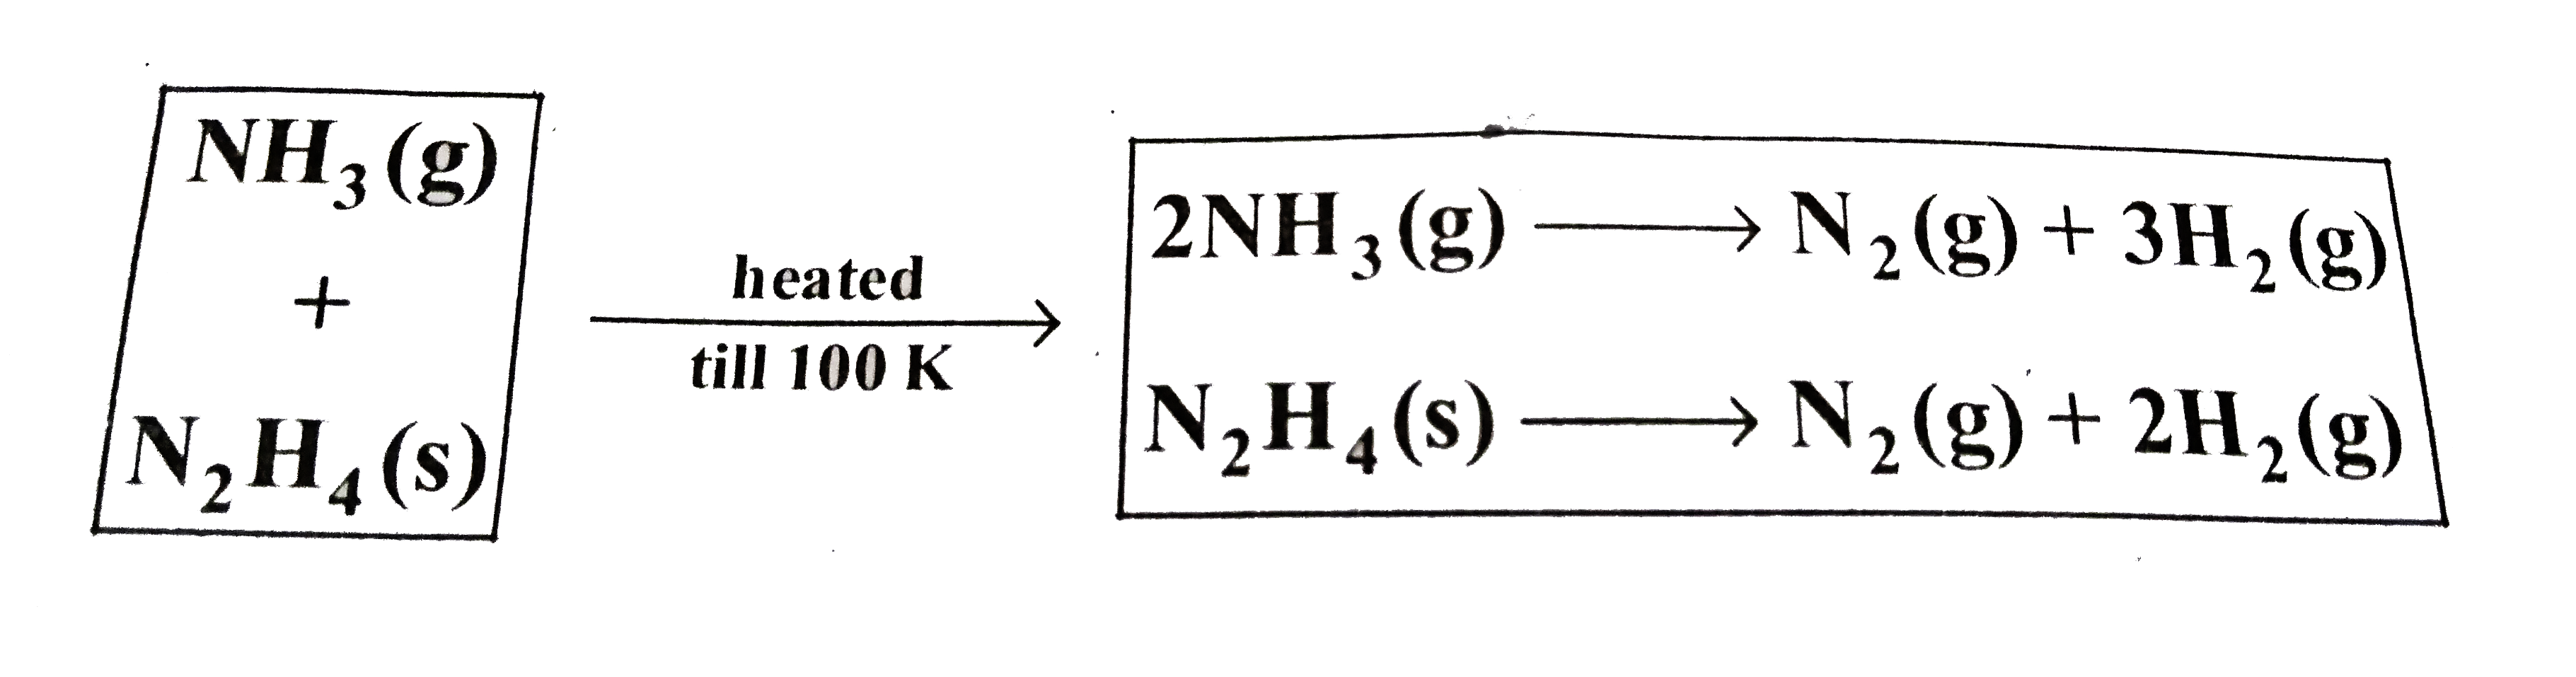 At      Assuming complete decomposition of NH(3) and N(2)H(4)   P=0.3 atm, P=2.7 atm   T=300K, T=200K   VL, VL   mole % of NH(3) in original mixture is (assume both concentration same volume)